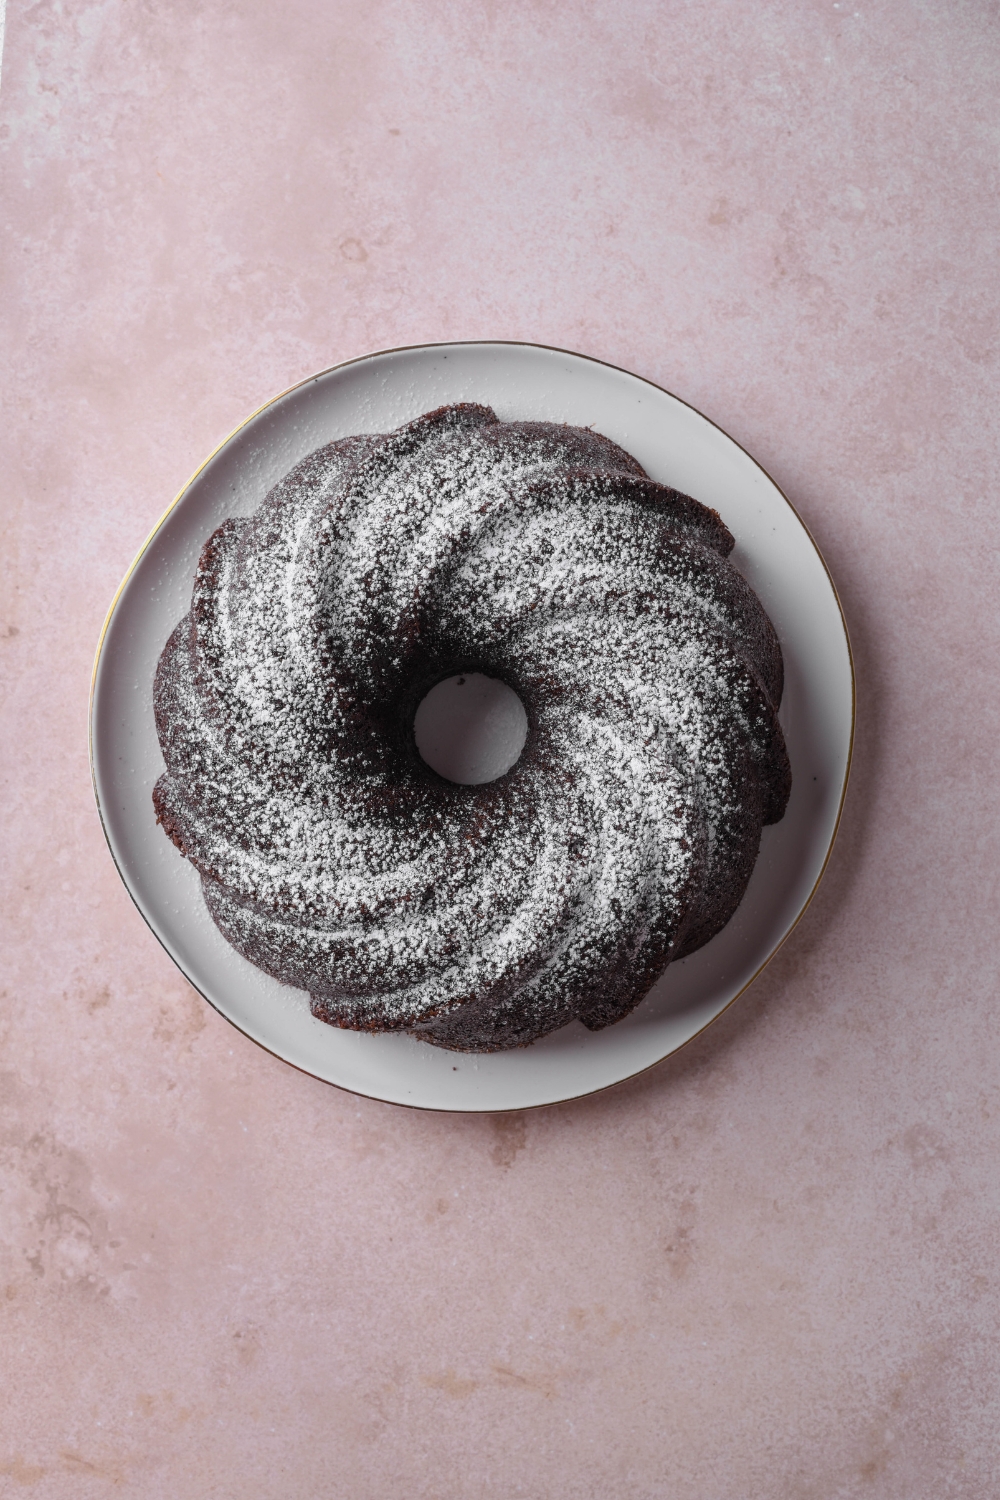 A sugar dusted chocolate pound cake sits on a white serving plate.